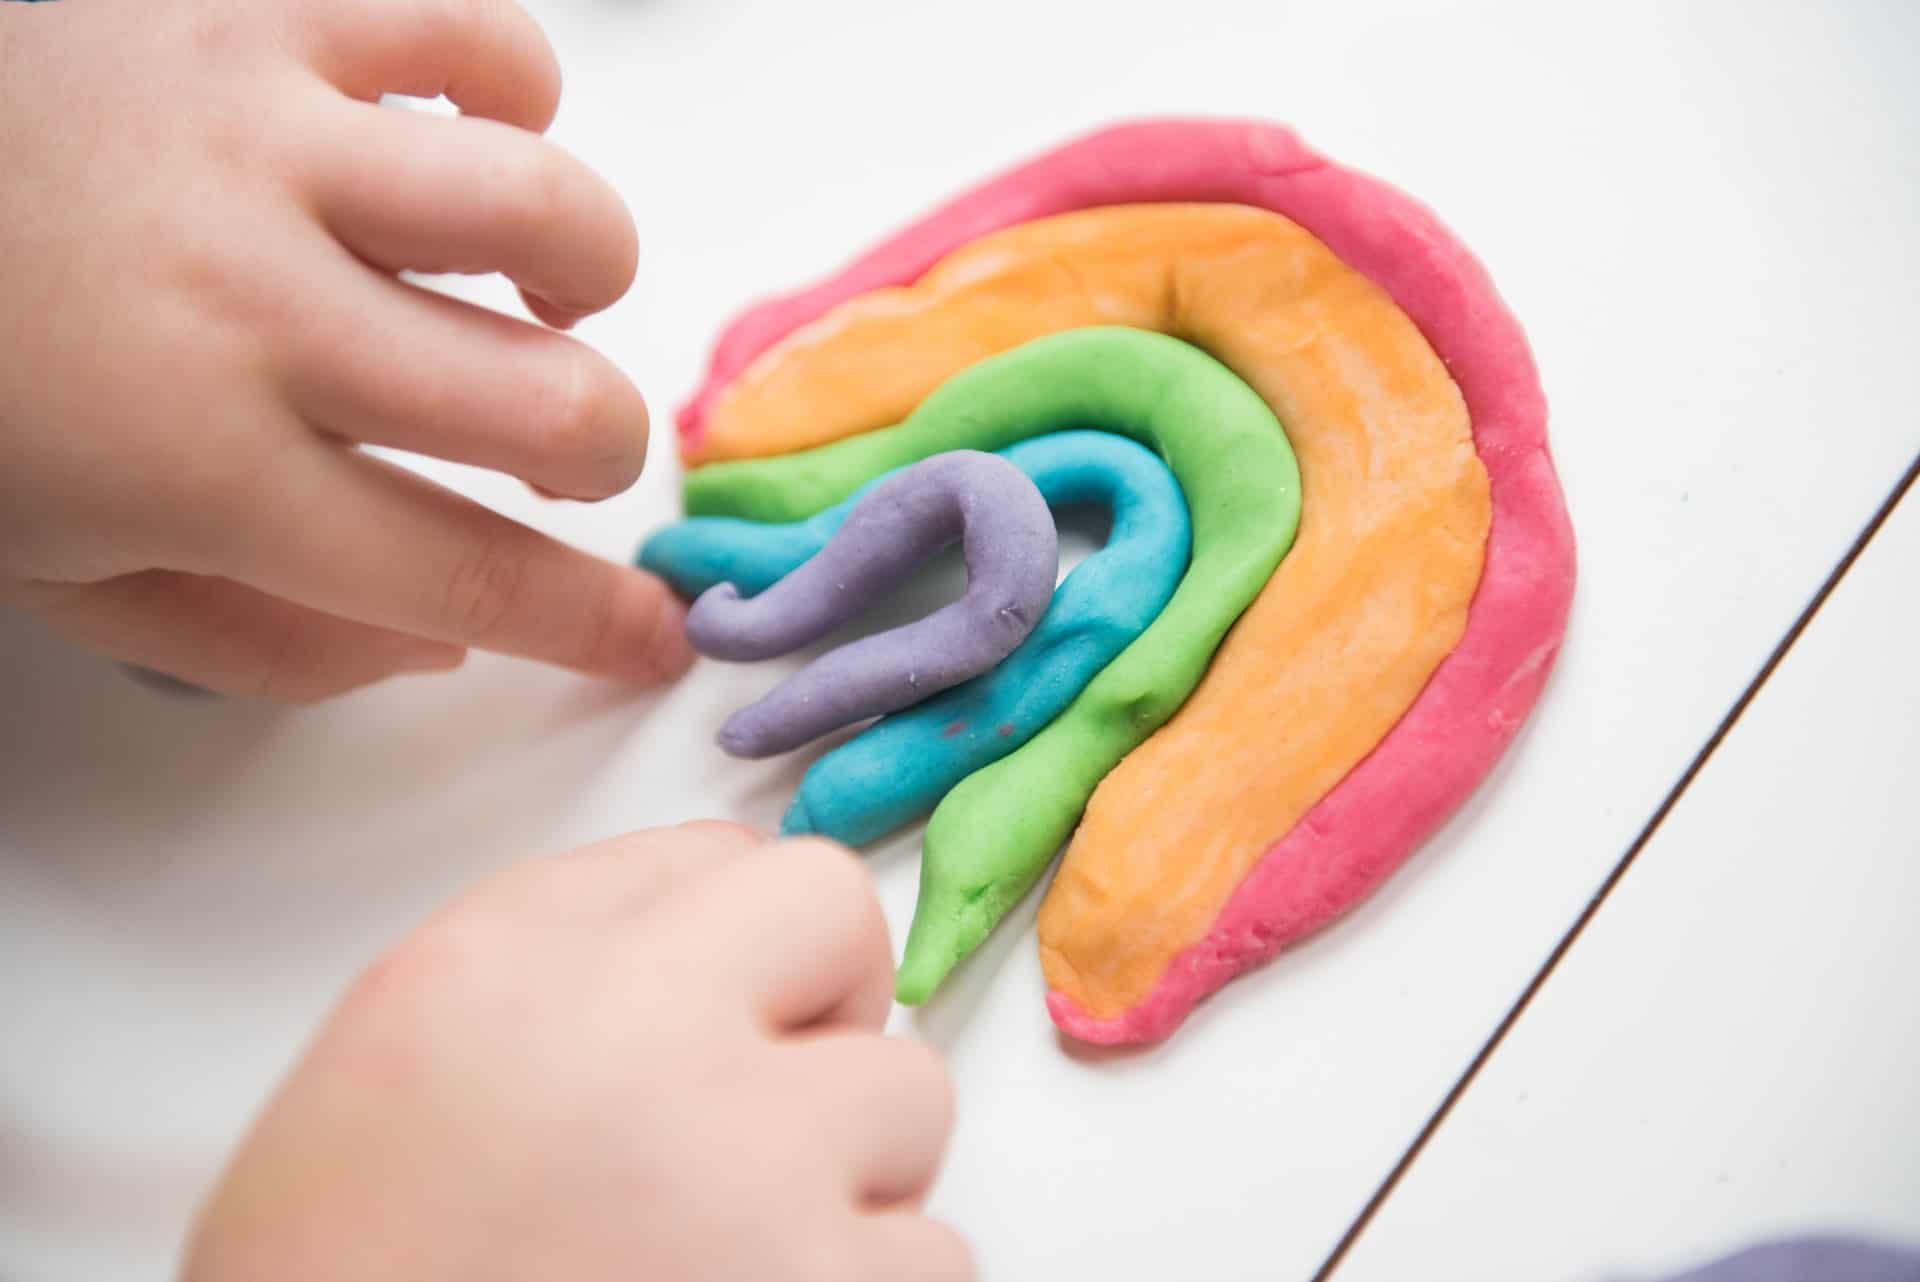 a child playing with play dough